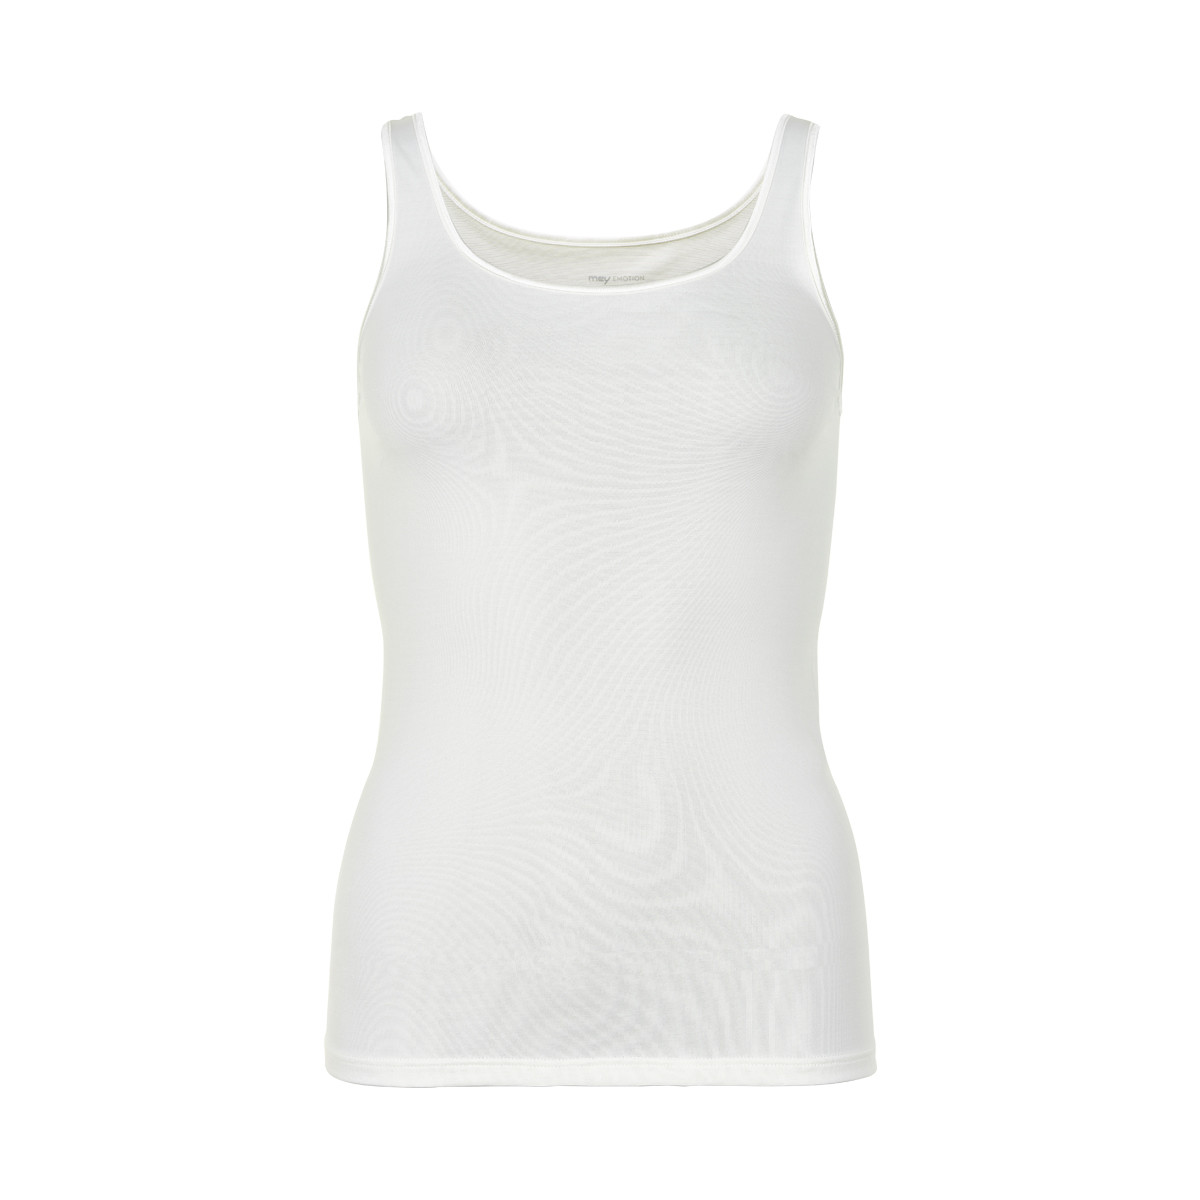 Mey Emotion Tank Top Champagne 55204 (Champagne, 50)